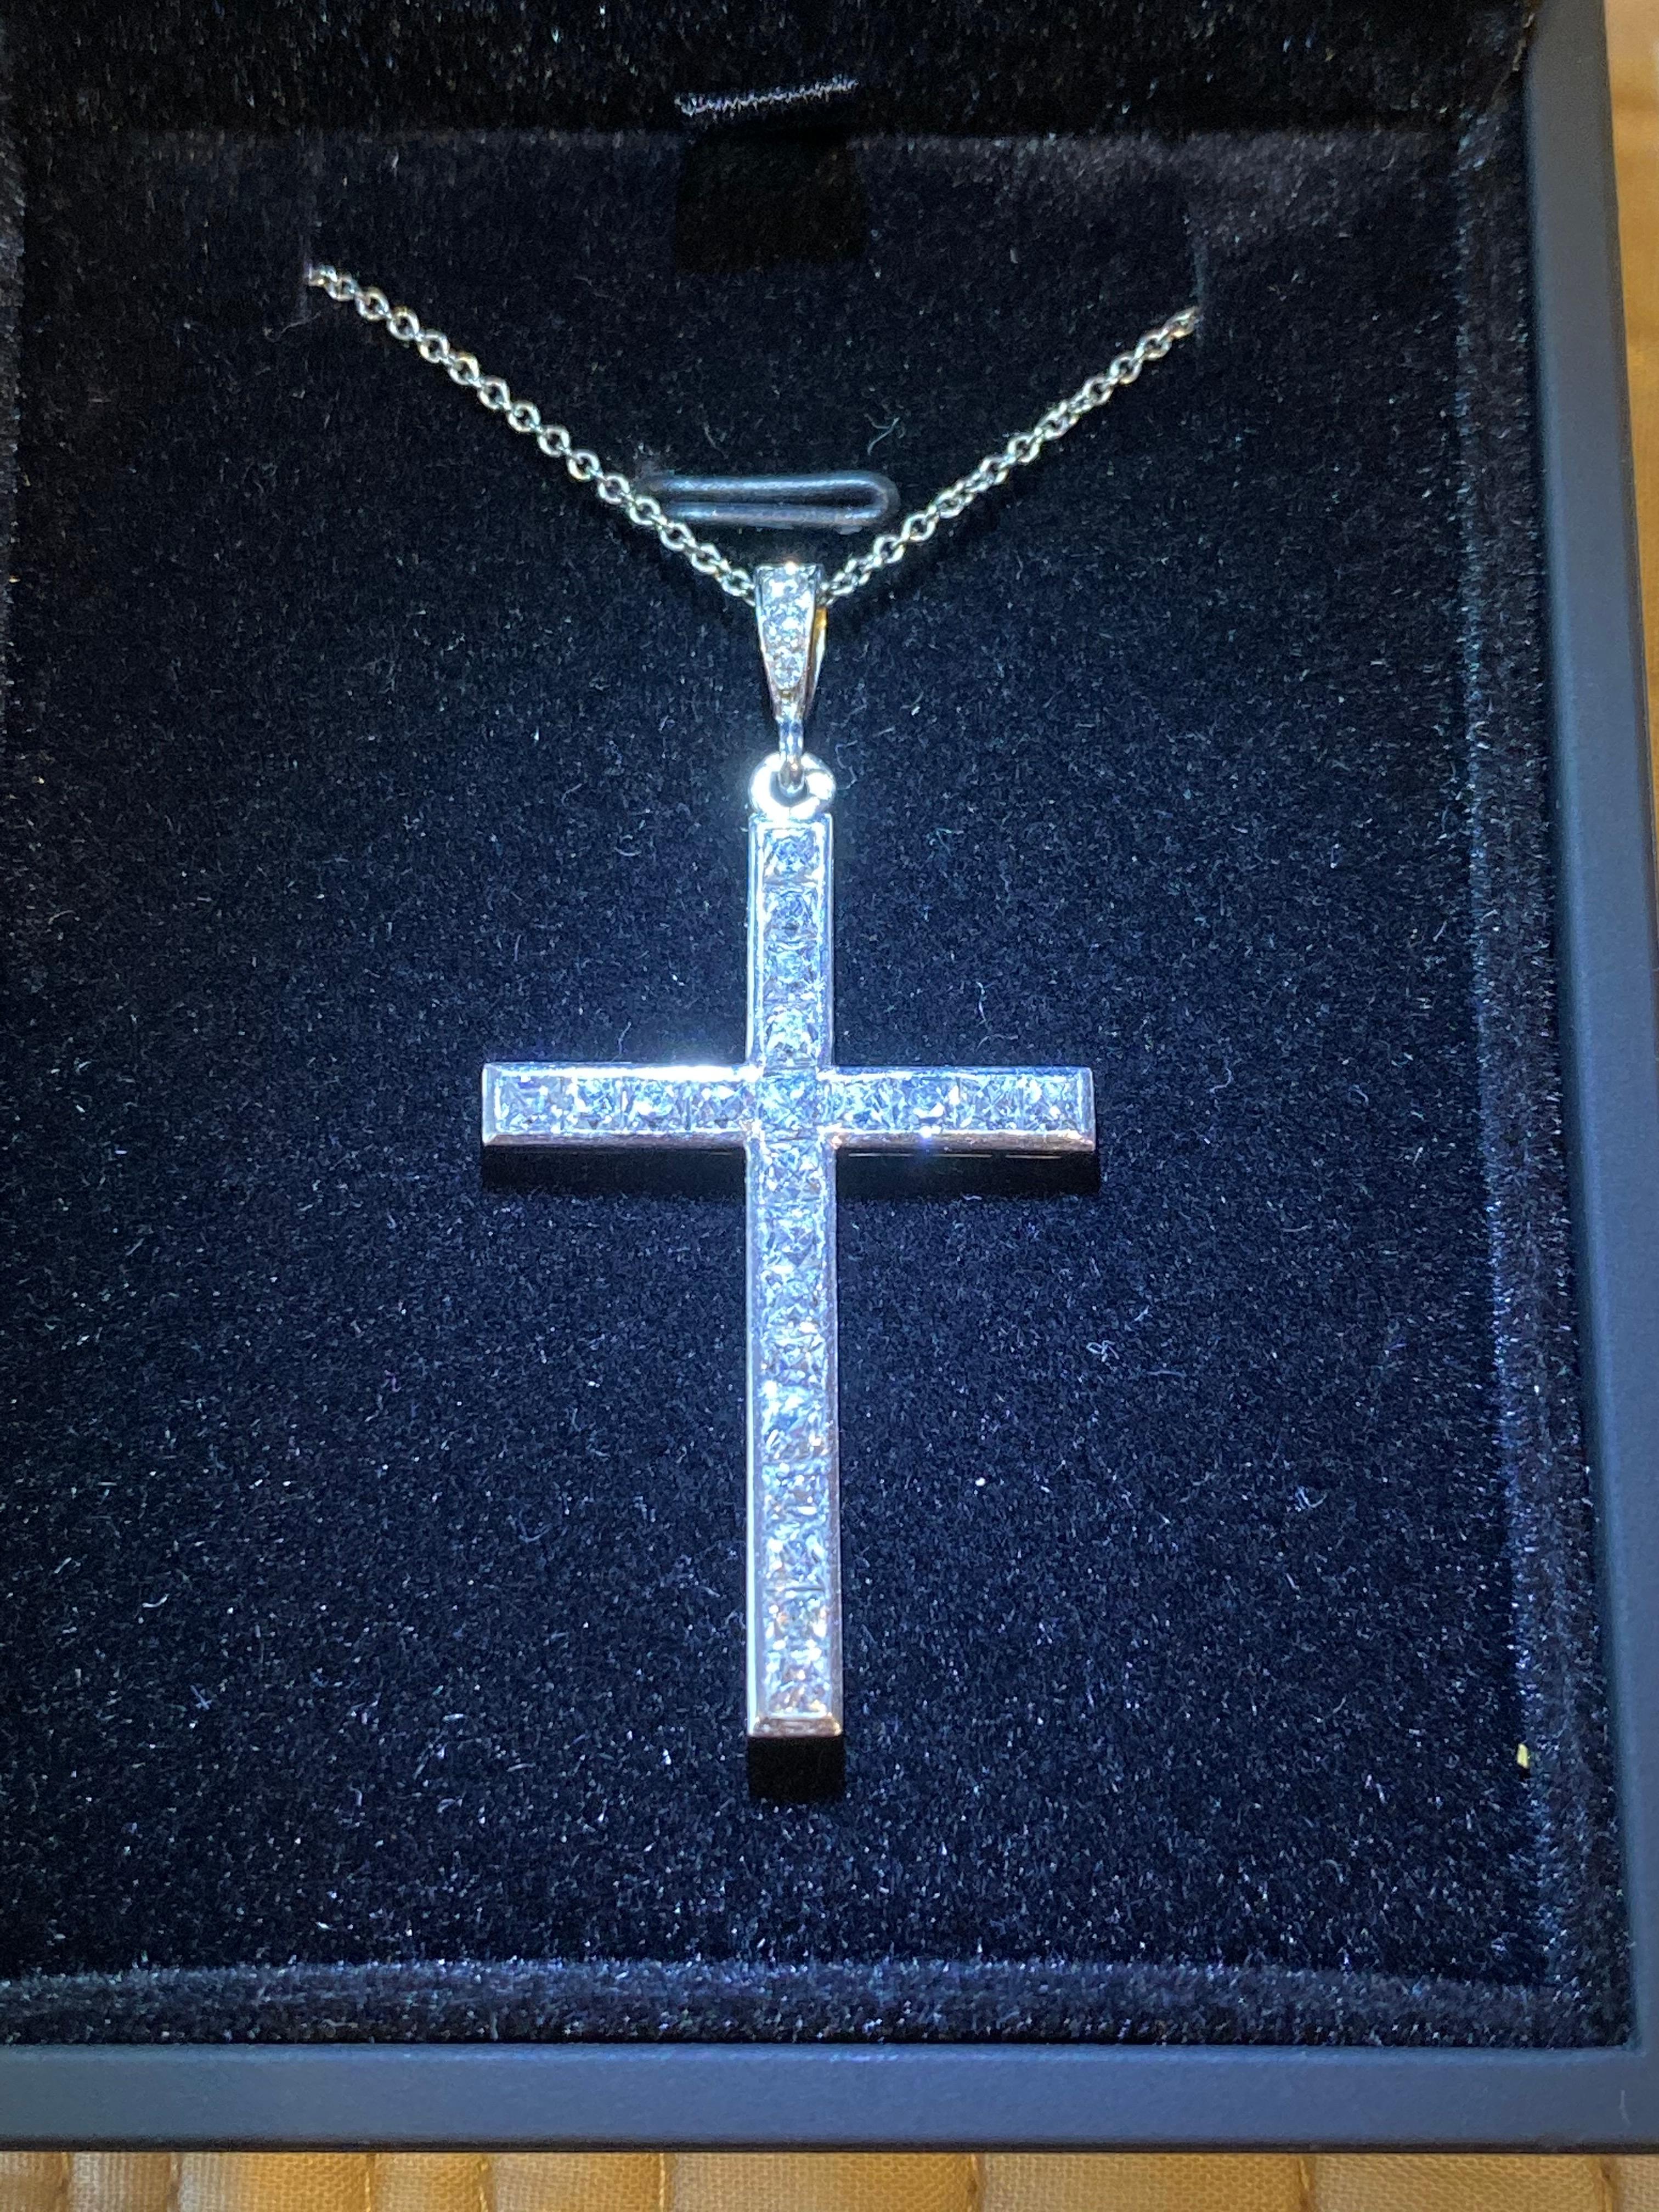 Wimbledon-Furniture

Wimbledon-Furniture is delighted to offer for sale this Stunning solid Platinum 3.0 ct Diamond pendant cross with Tiffany & Co Platinum chain

The pendant is platinum as mentioned, it has 22 cushion shaped diamonds to the main